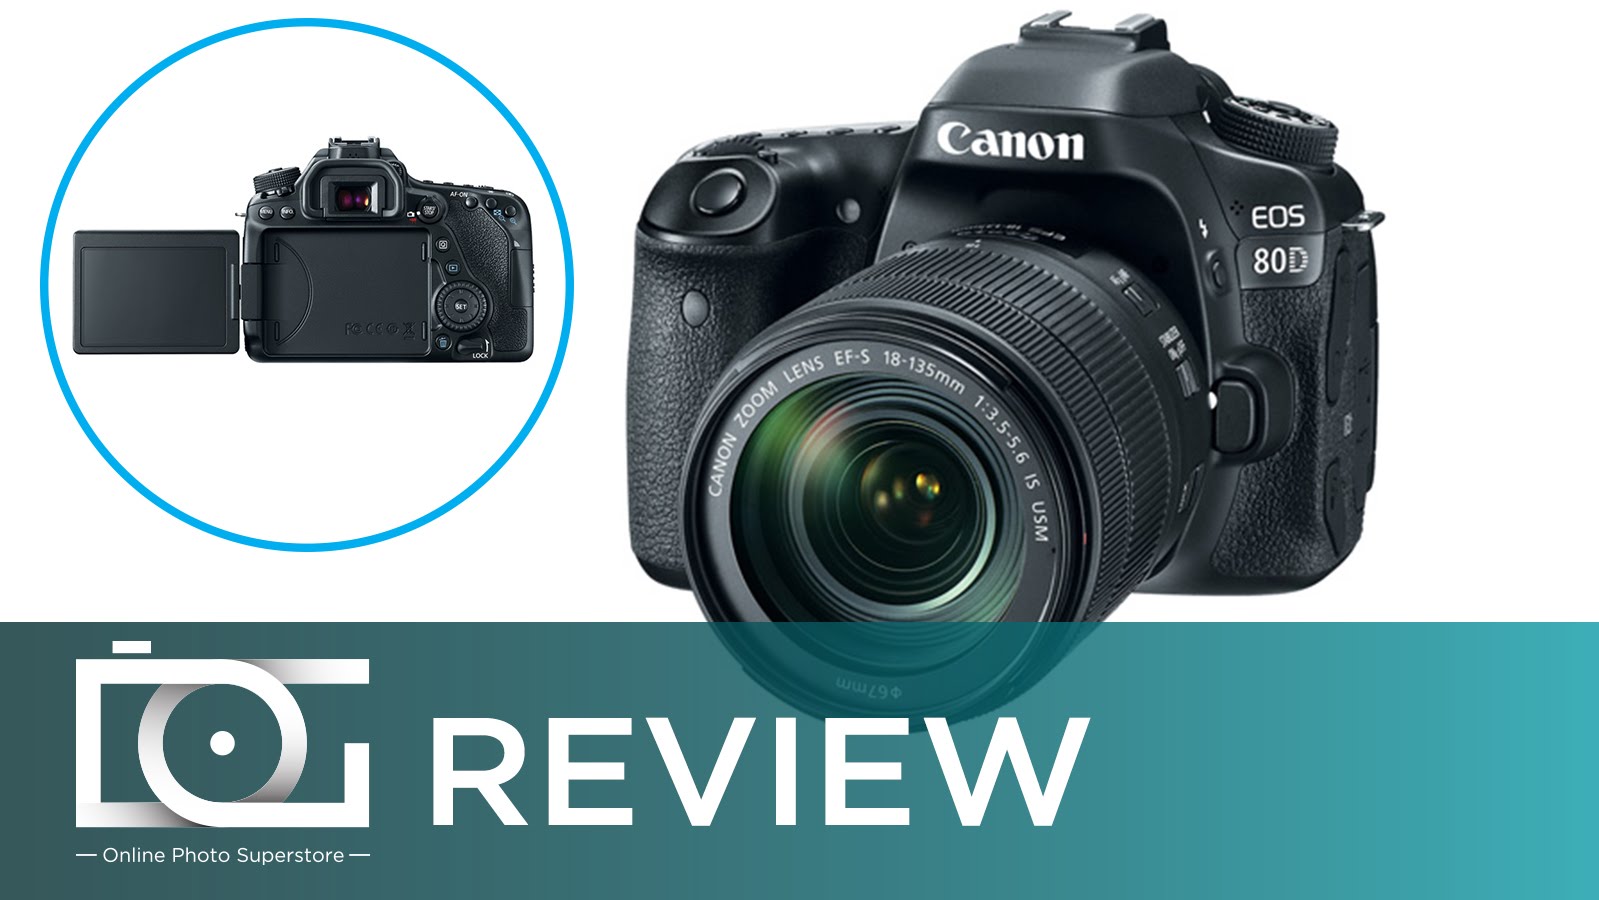 NEW CANON 80D DSLR Camera Unboxing Review